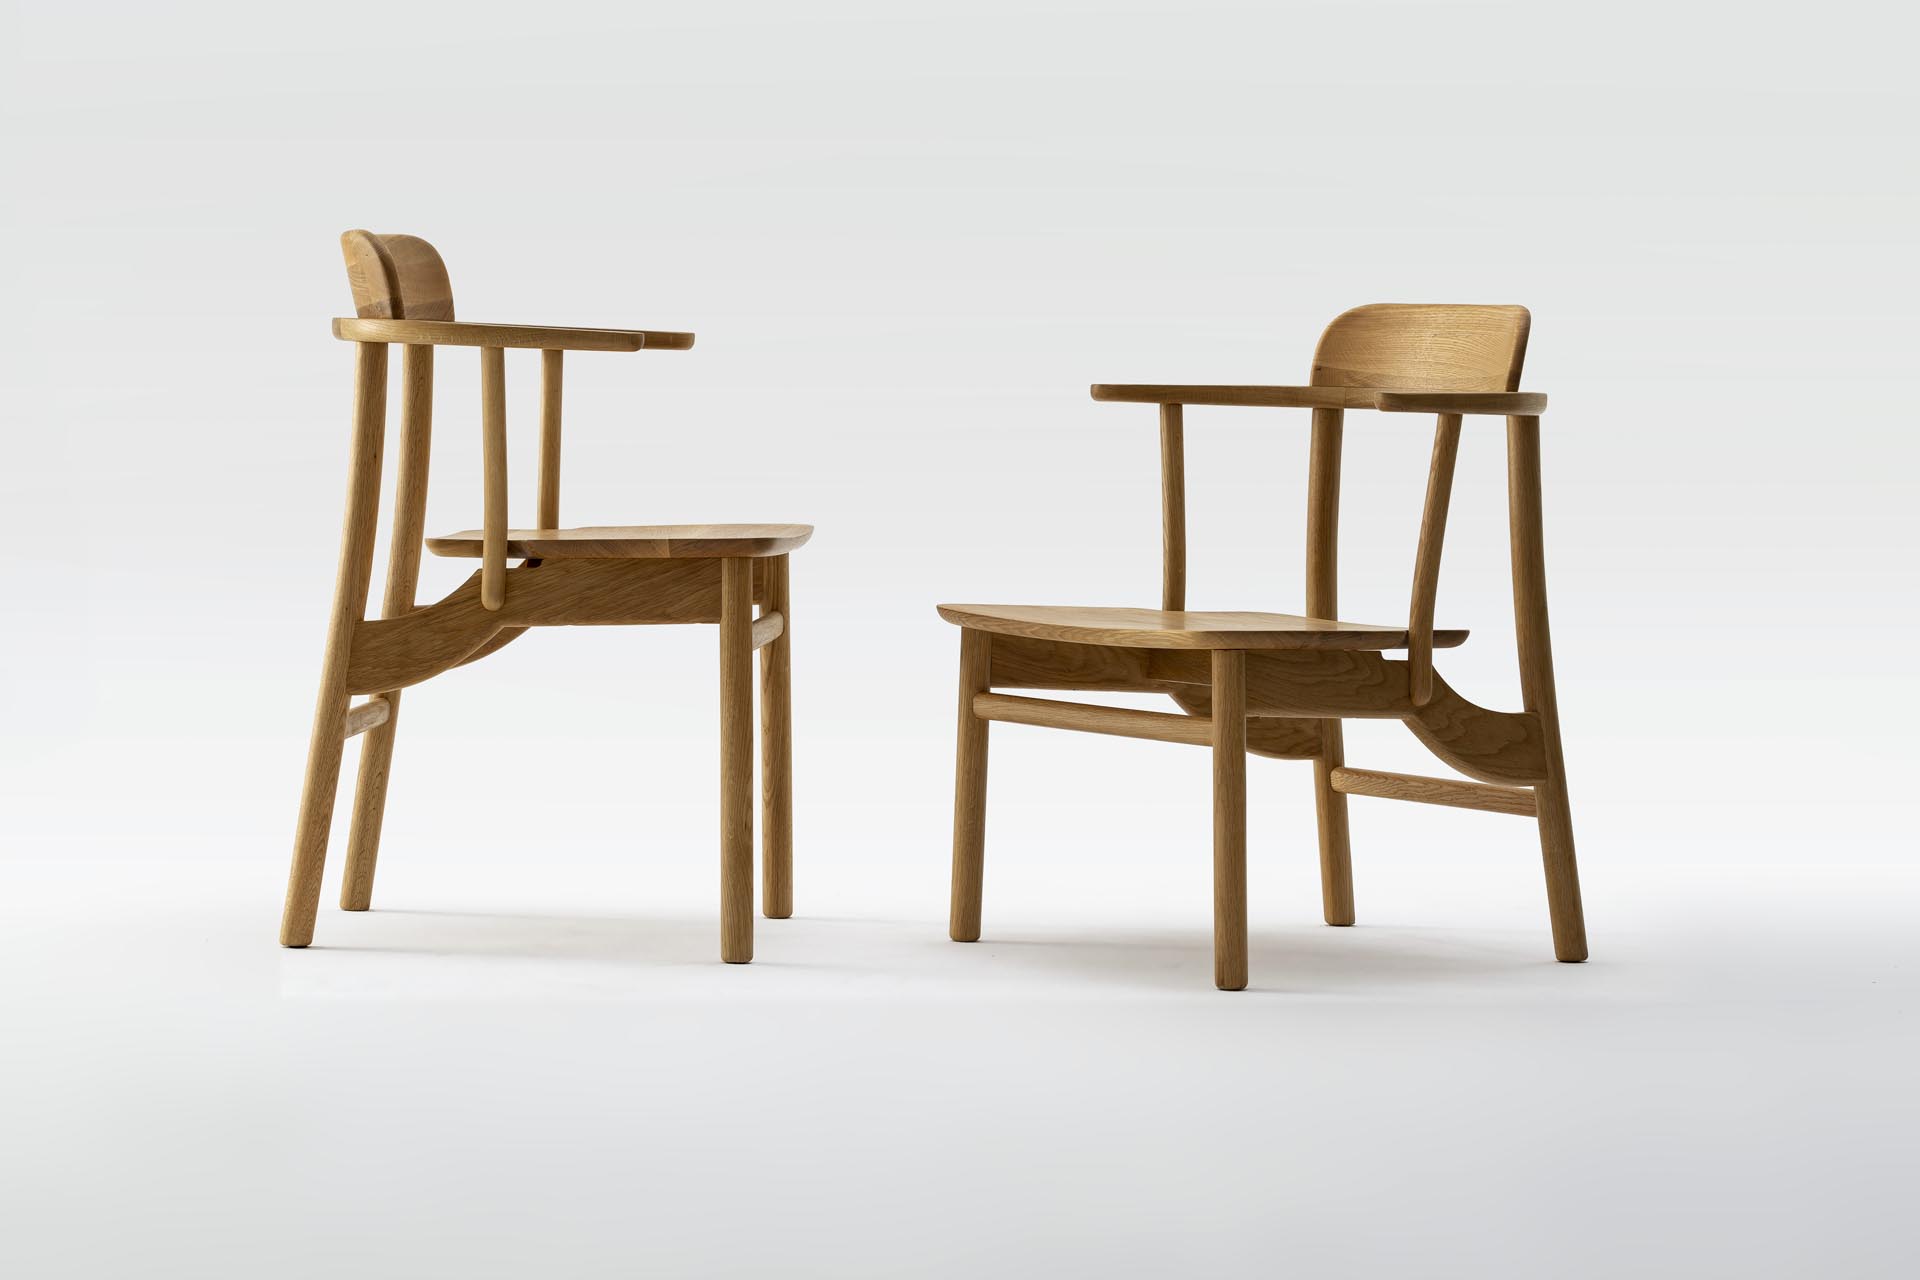 MUSE Design Winners - Crown Chairs